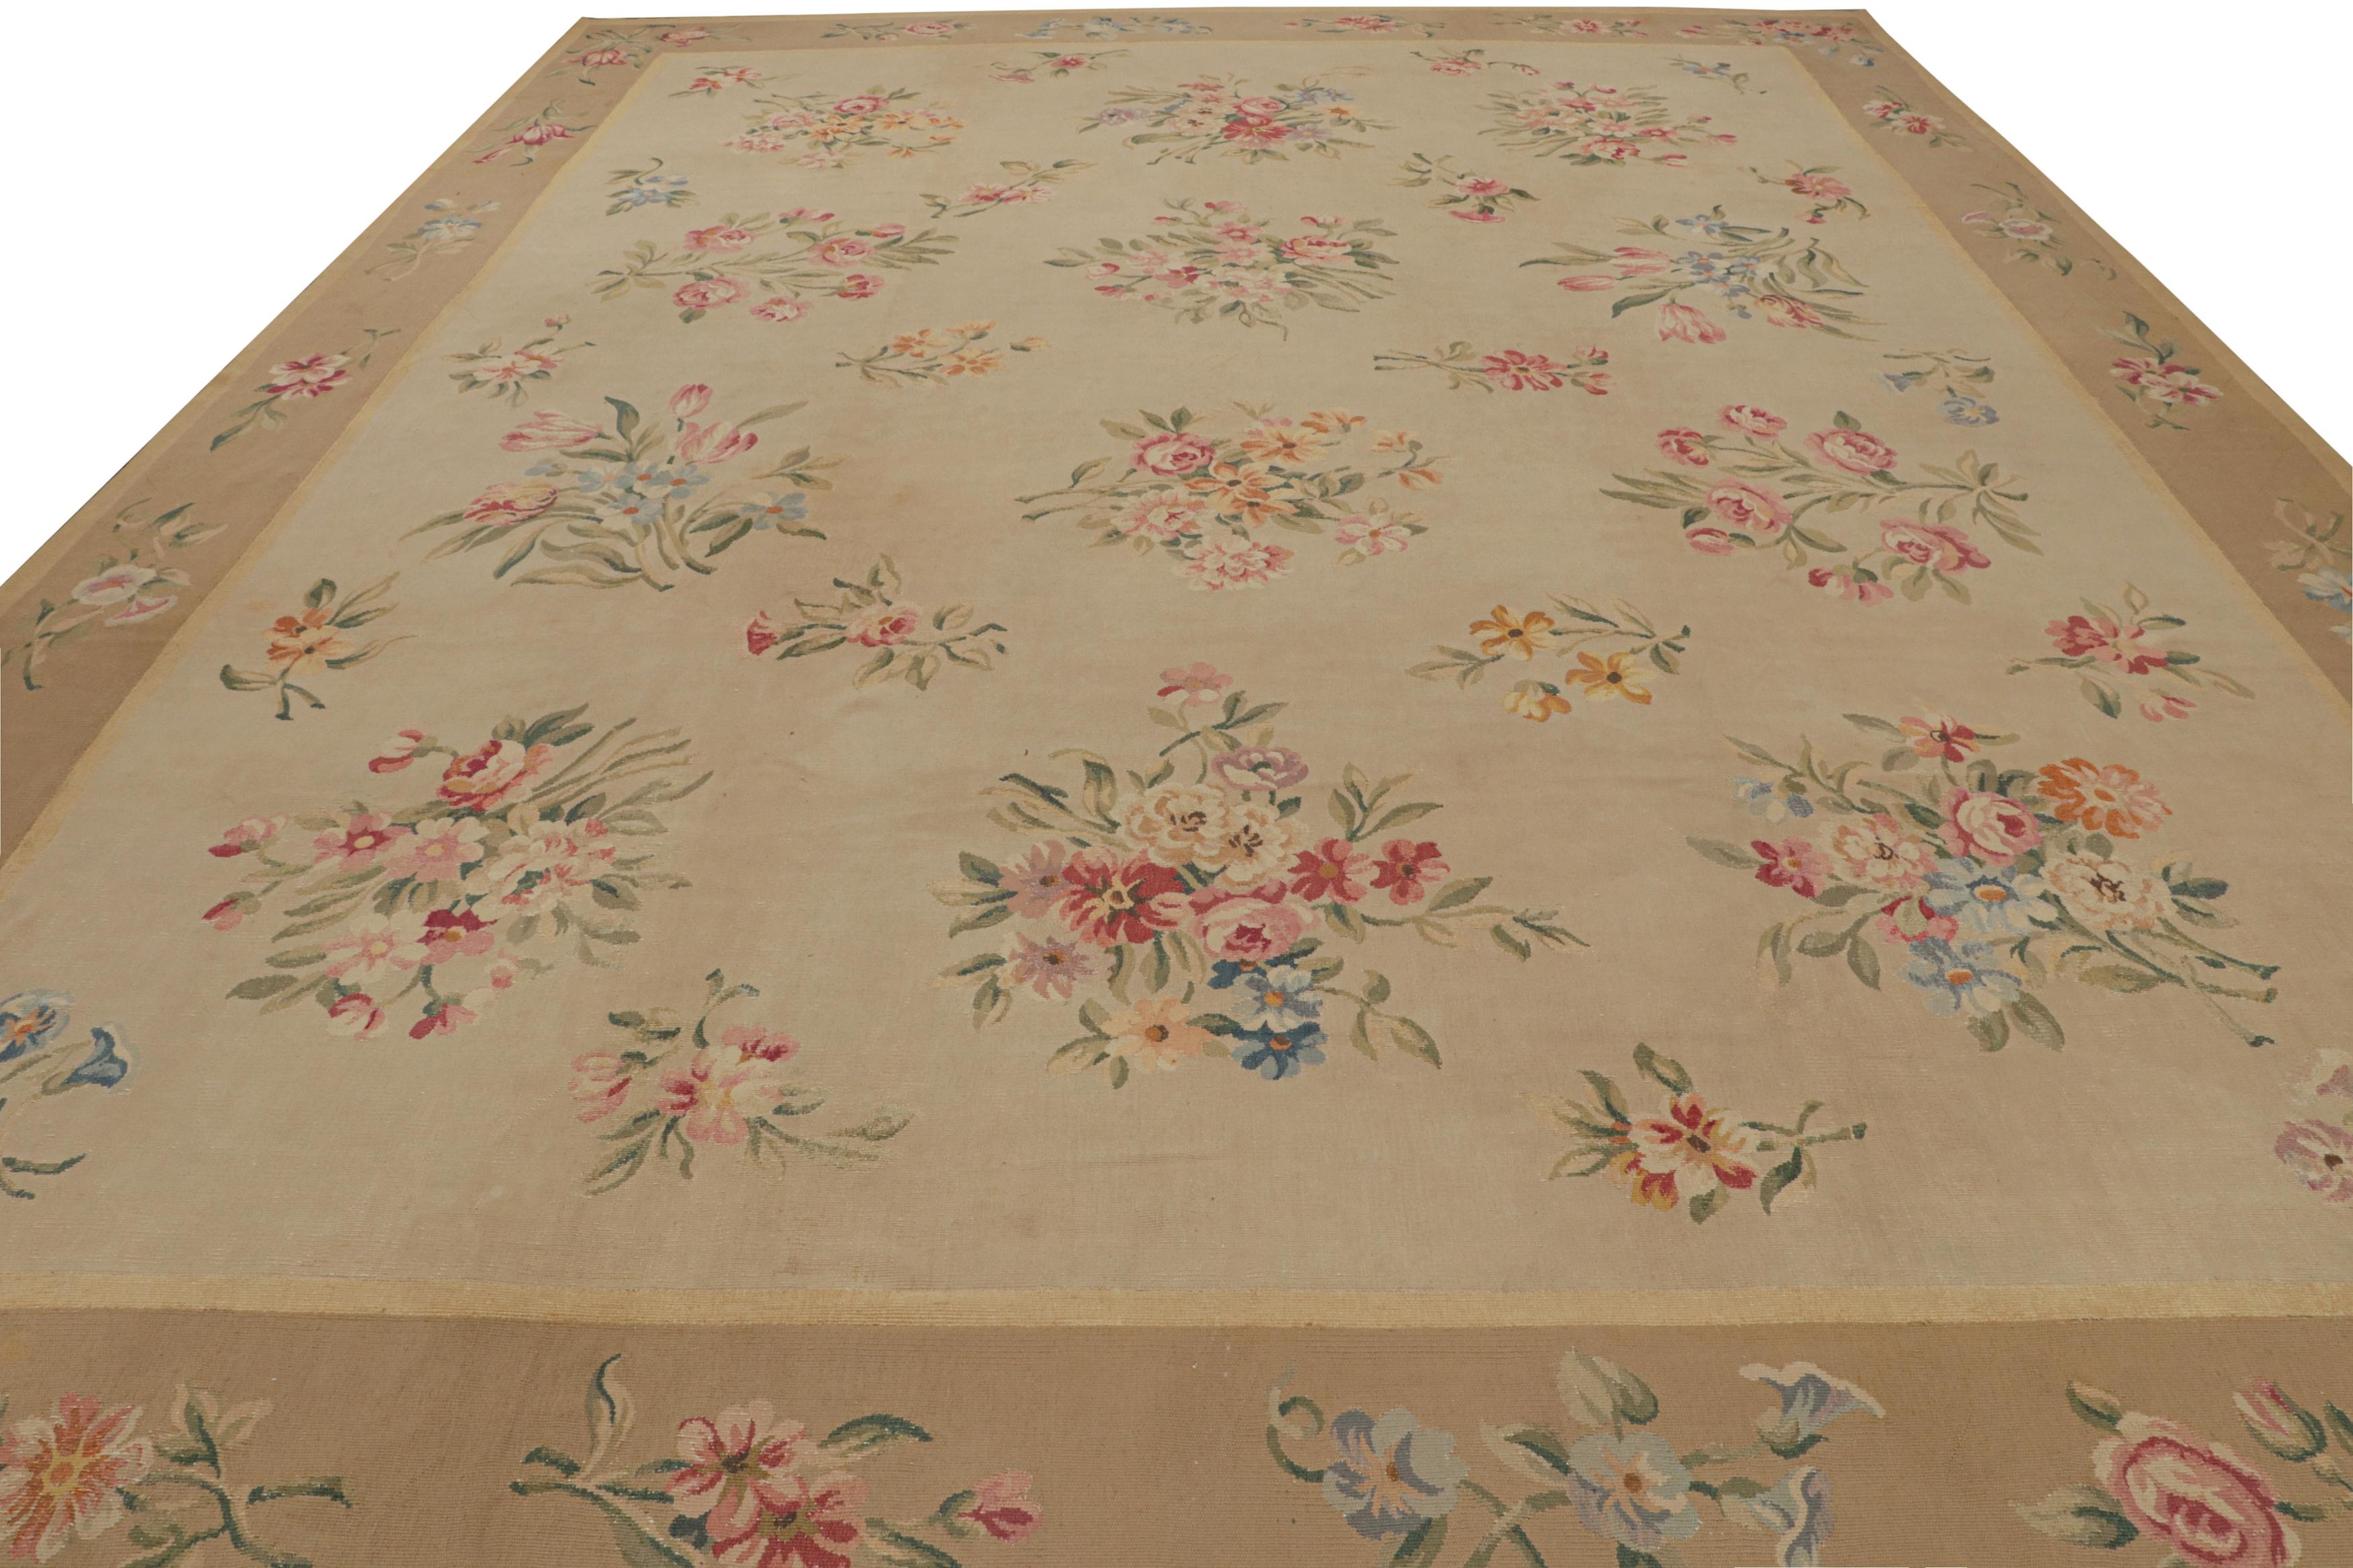 Antique Aubusson Rug in Beige-Brown with Floral Patterns, from Rug & Kilim In Good Condition For Sale In Long Island City, NY